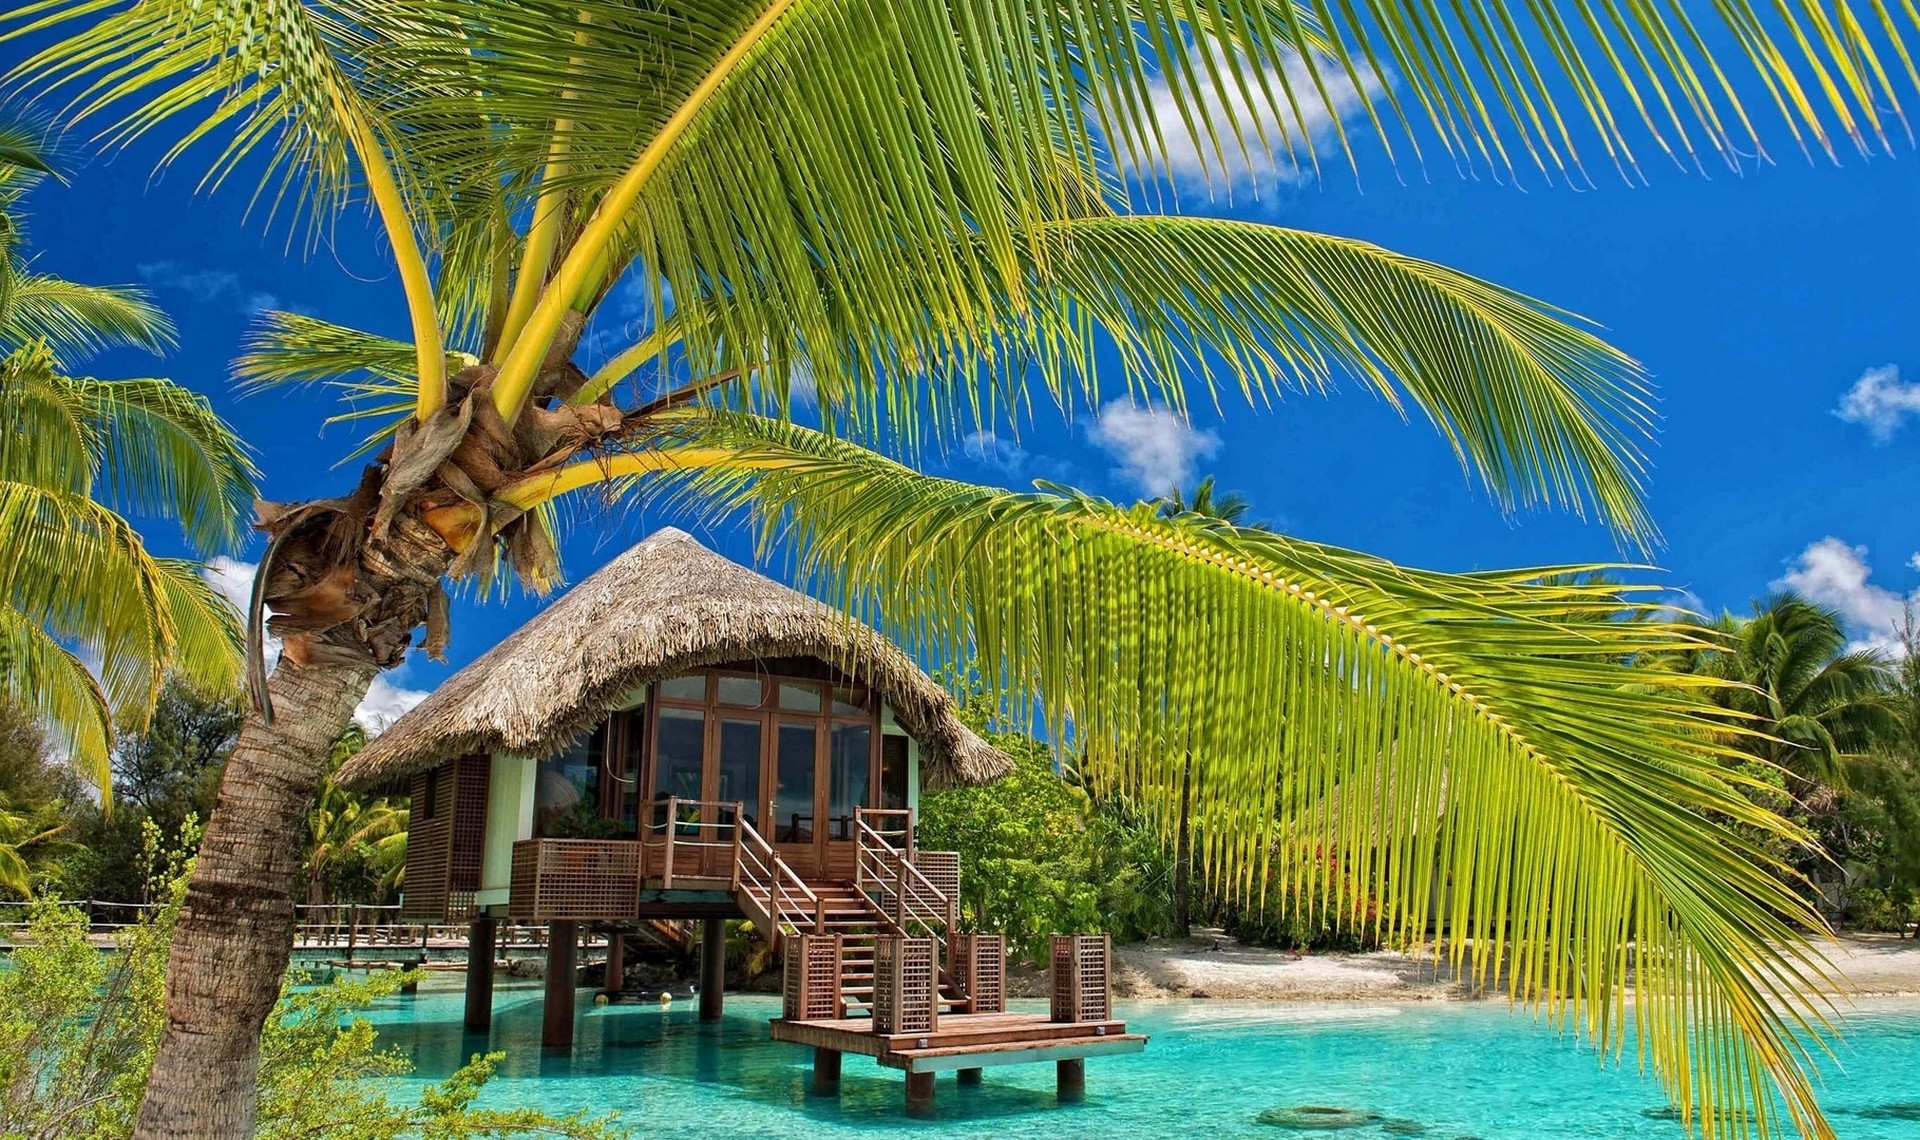 General 1920x1140 palm trees resort beach tropical water bungalow sea summer nature landscape